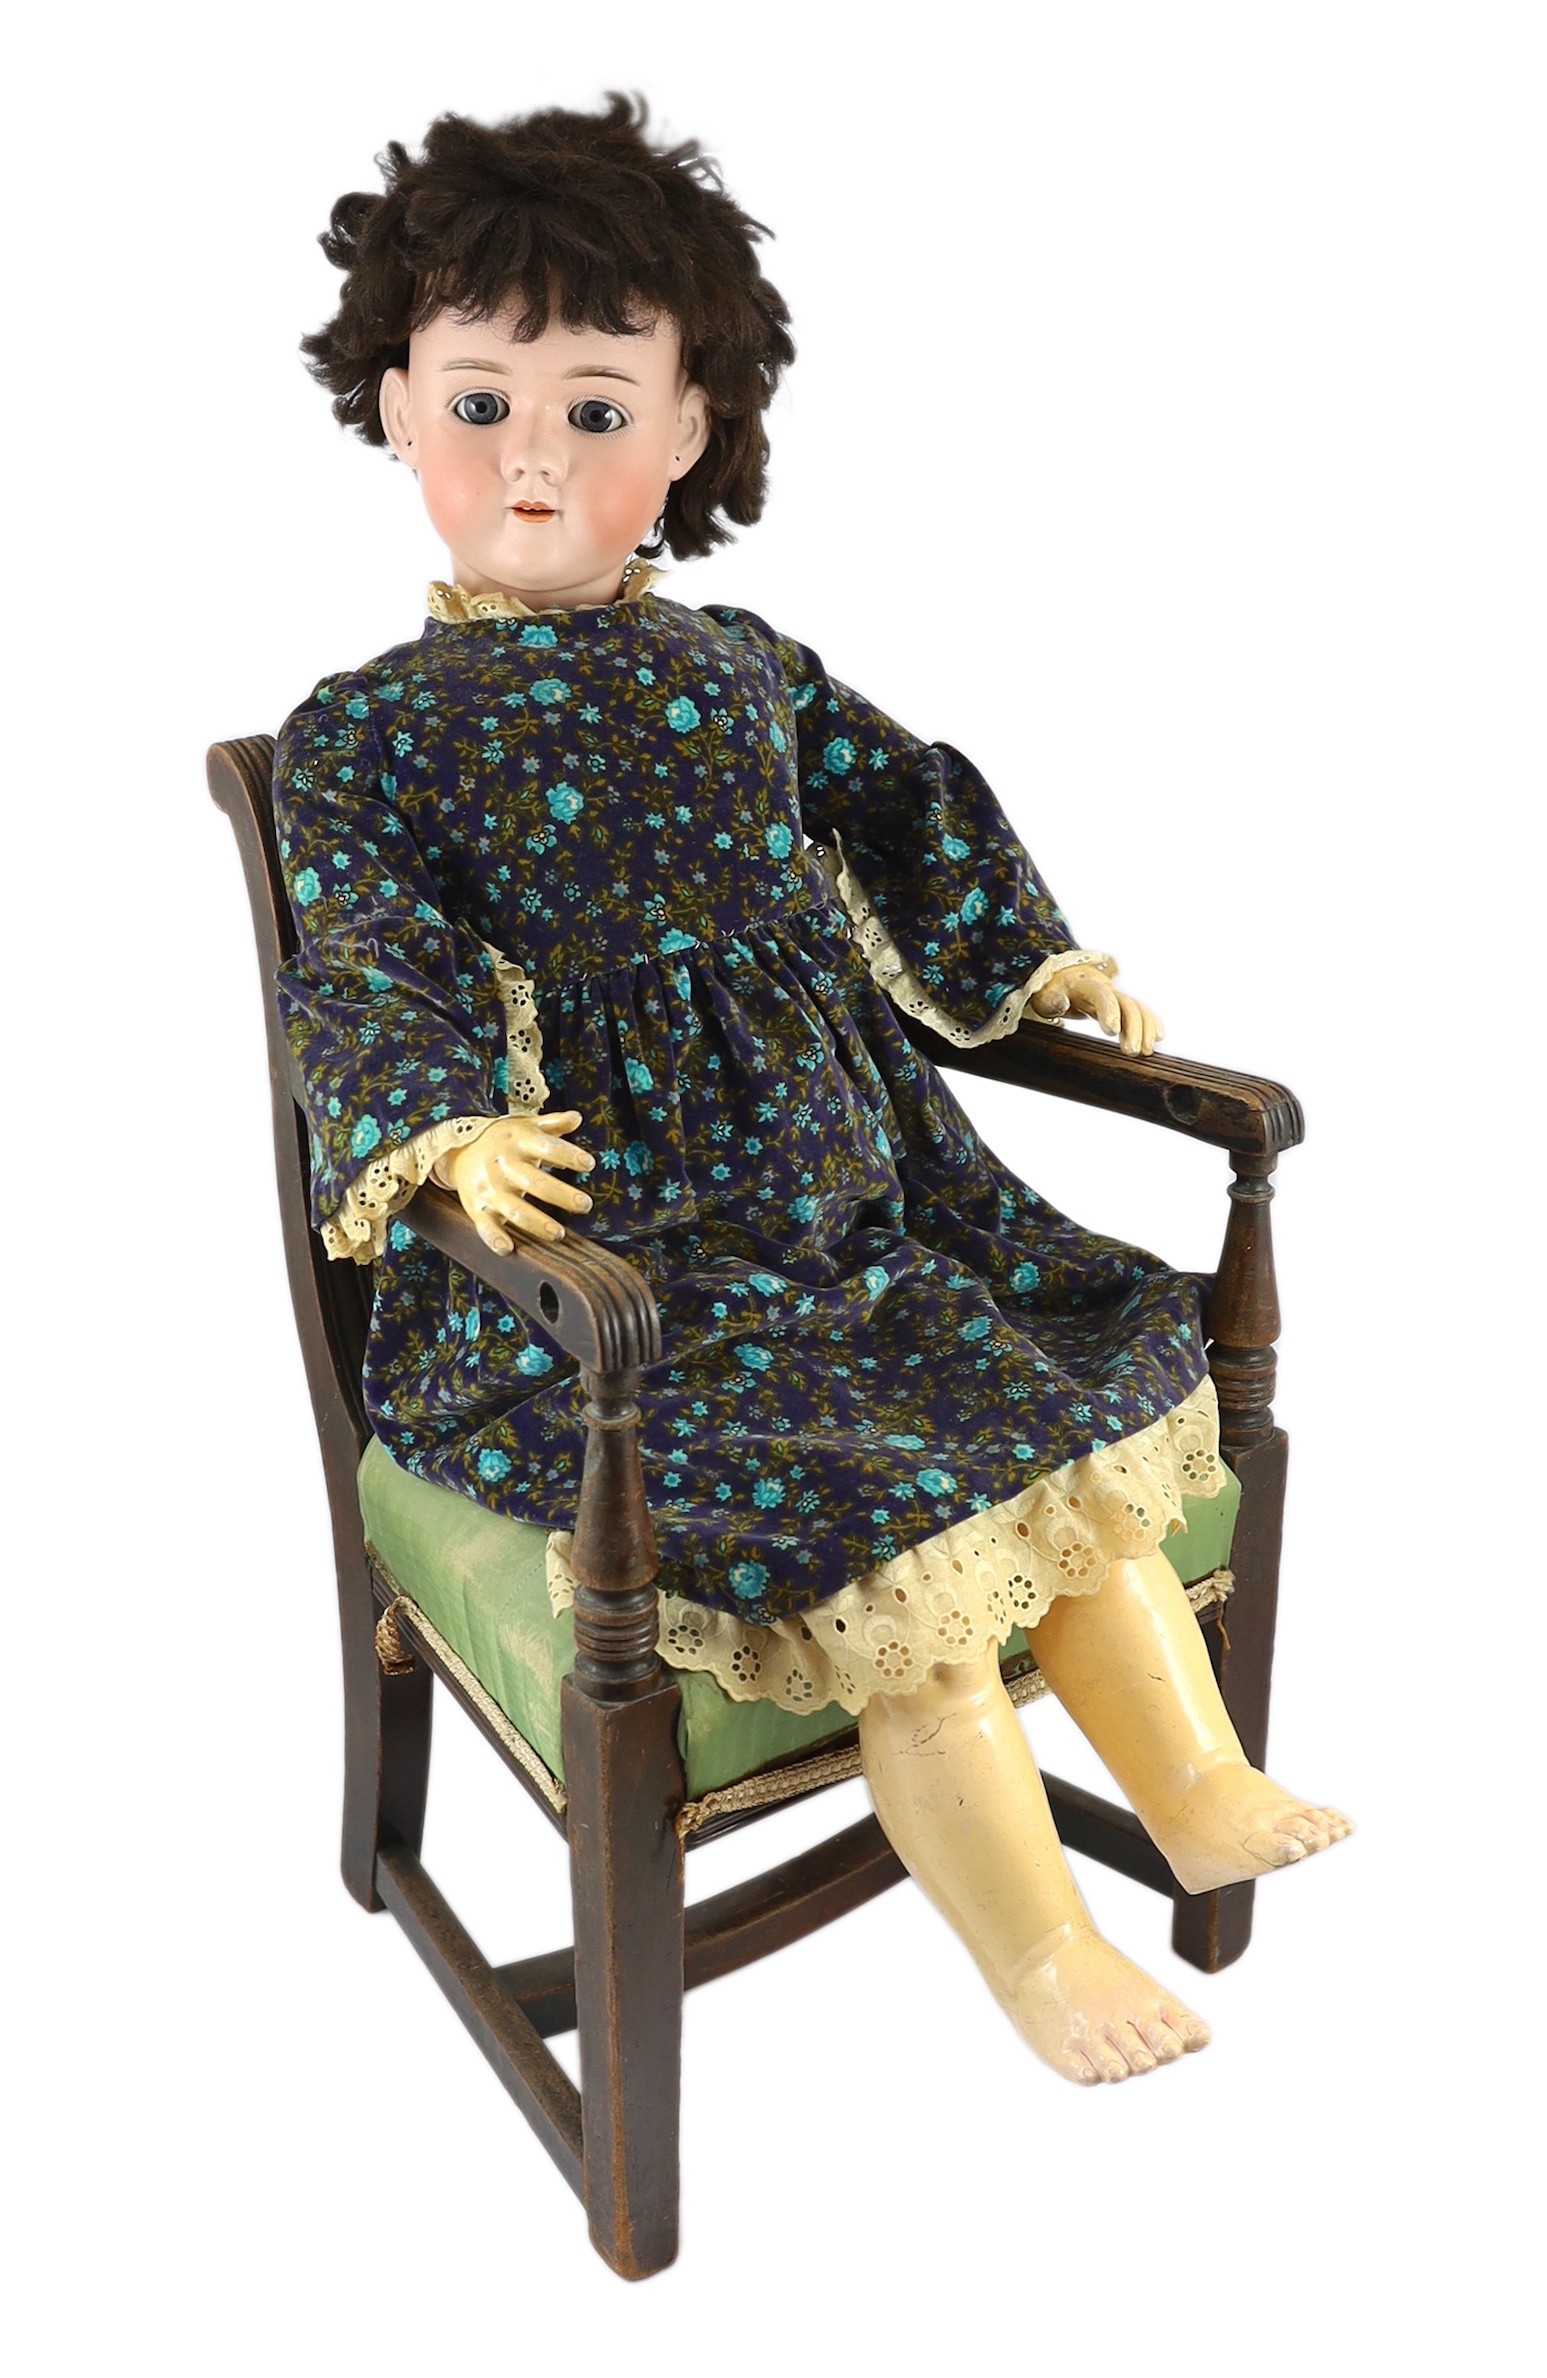 A Heinrich Handwerck bisque doll, German, circa 1900, 33in. Please note the chair is for display purposes only.